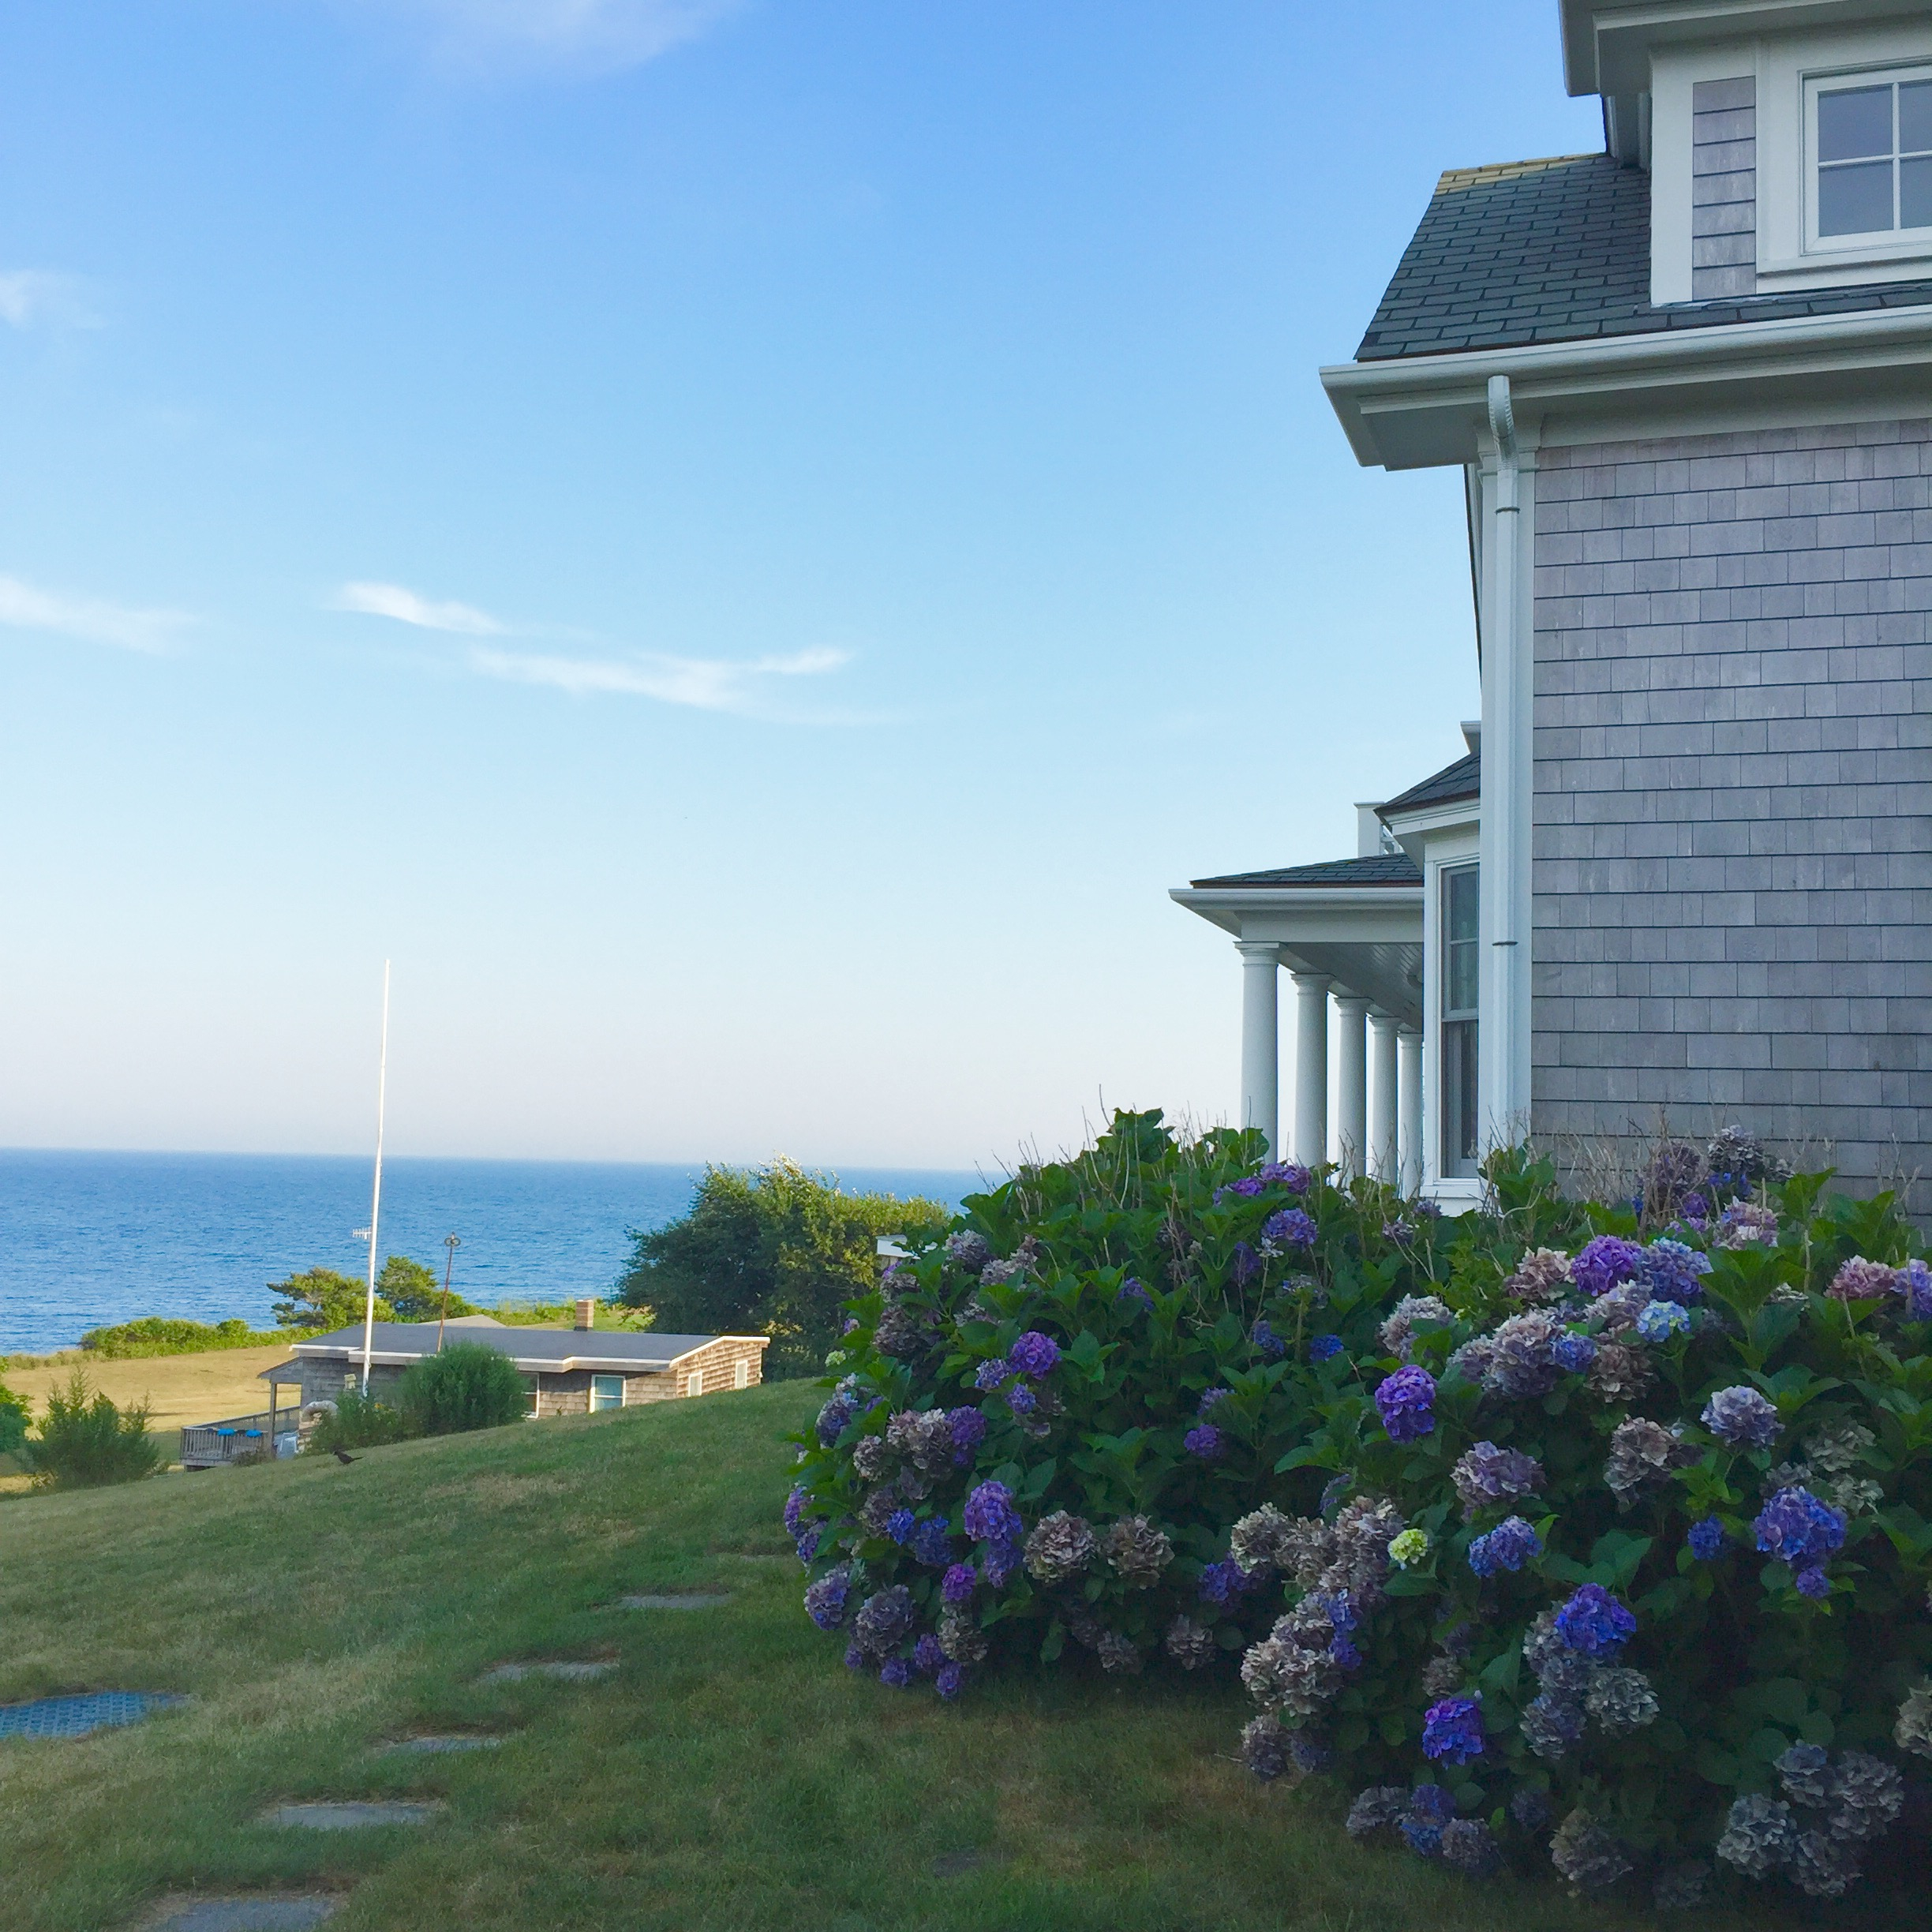 A typical house on Cuttyhunk with sea view and hydrangea